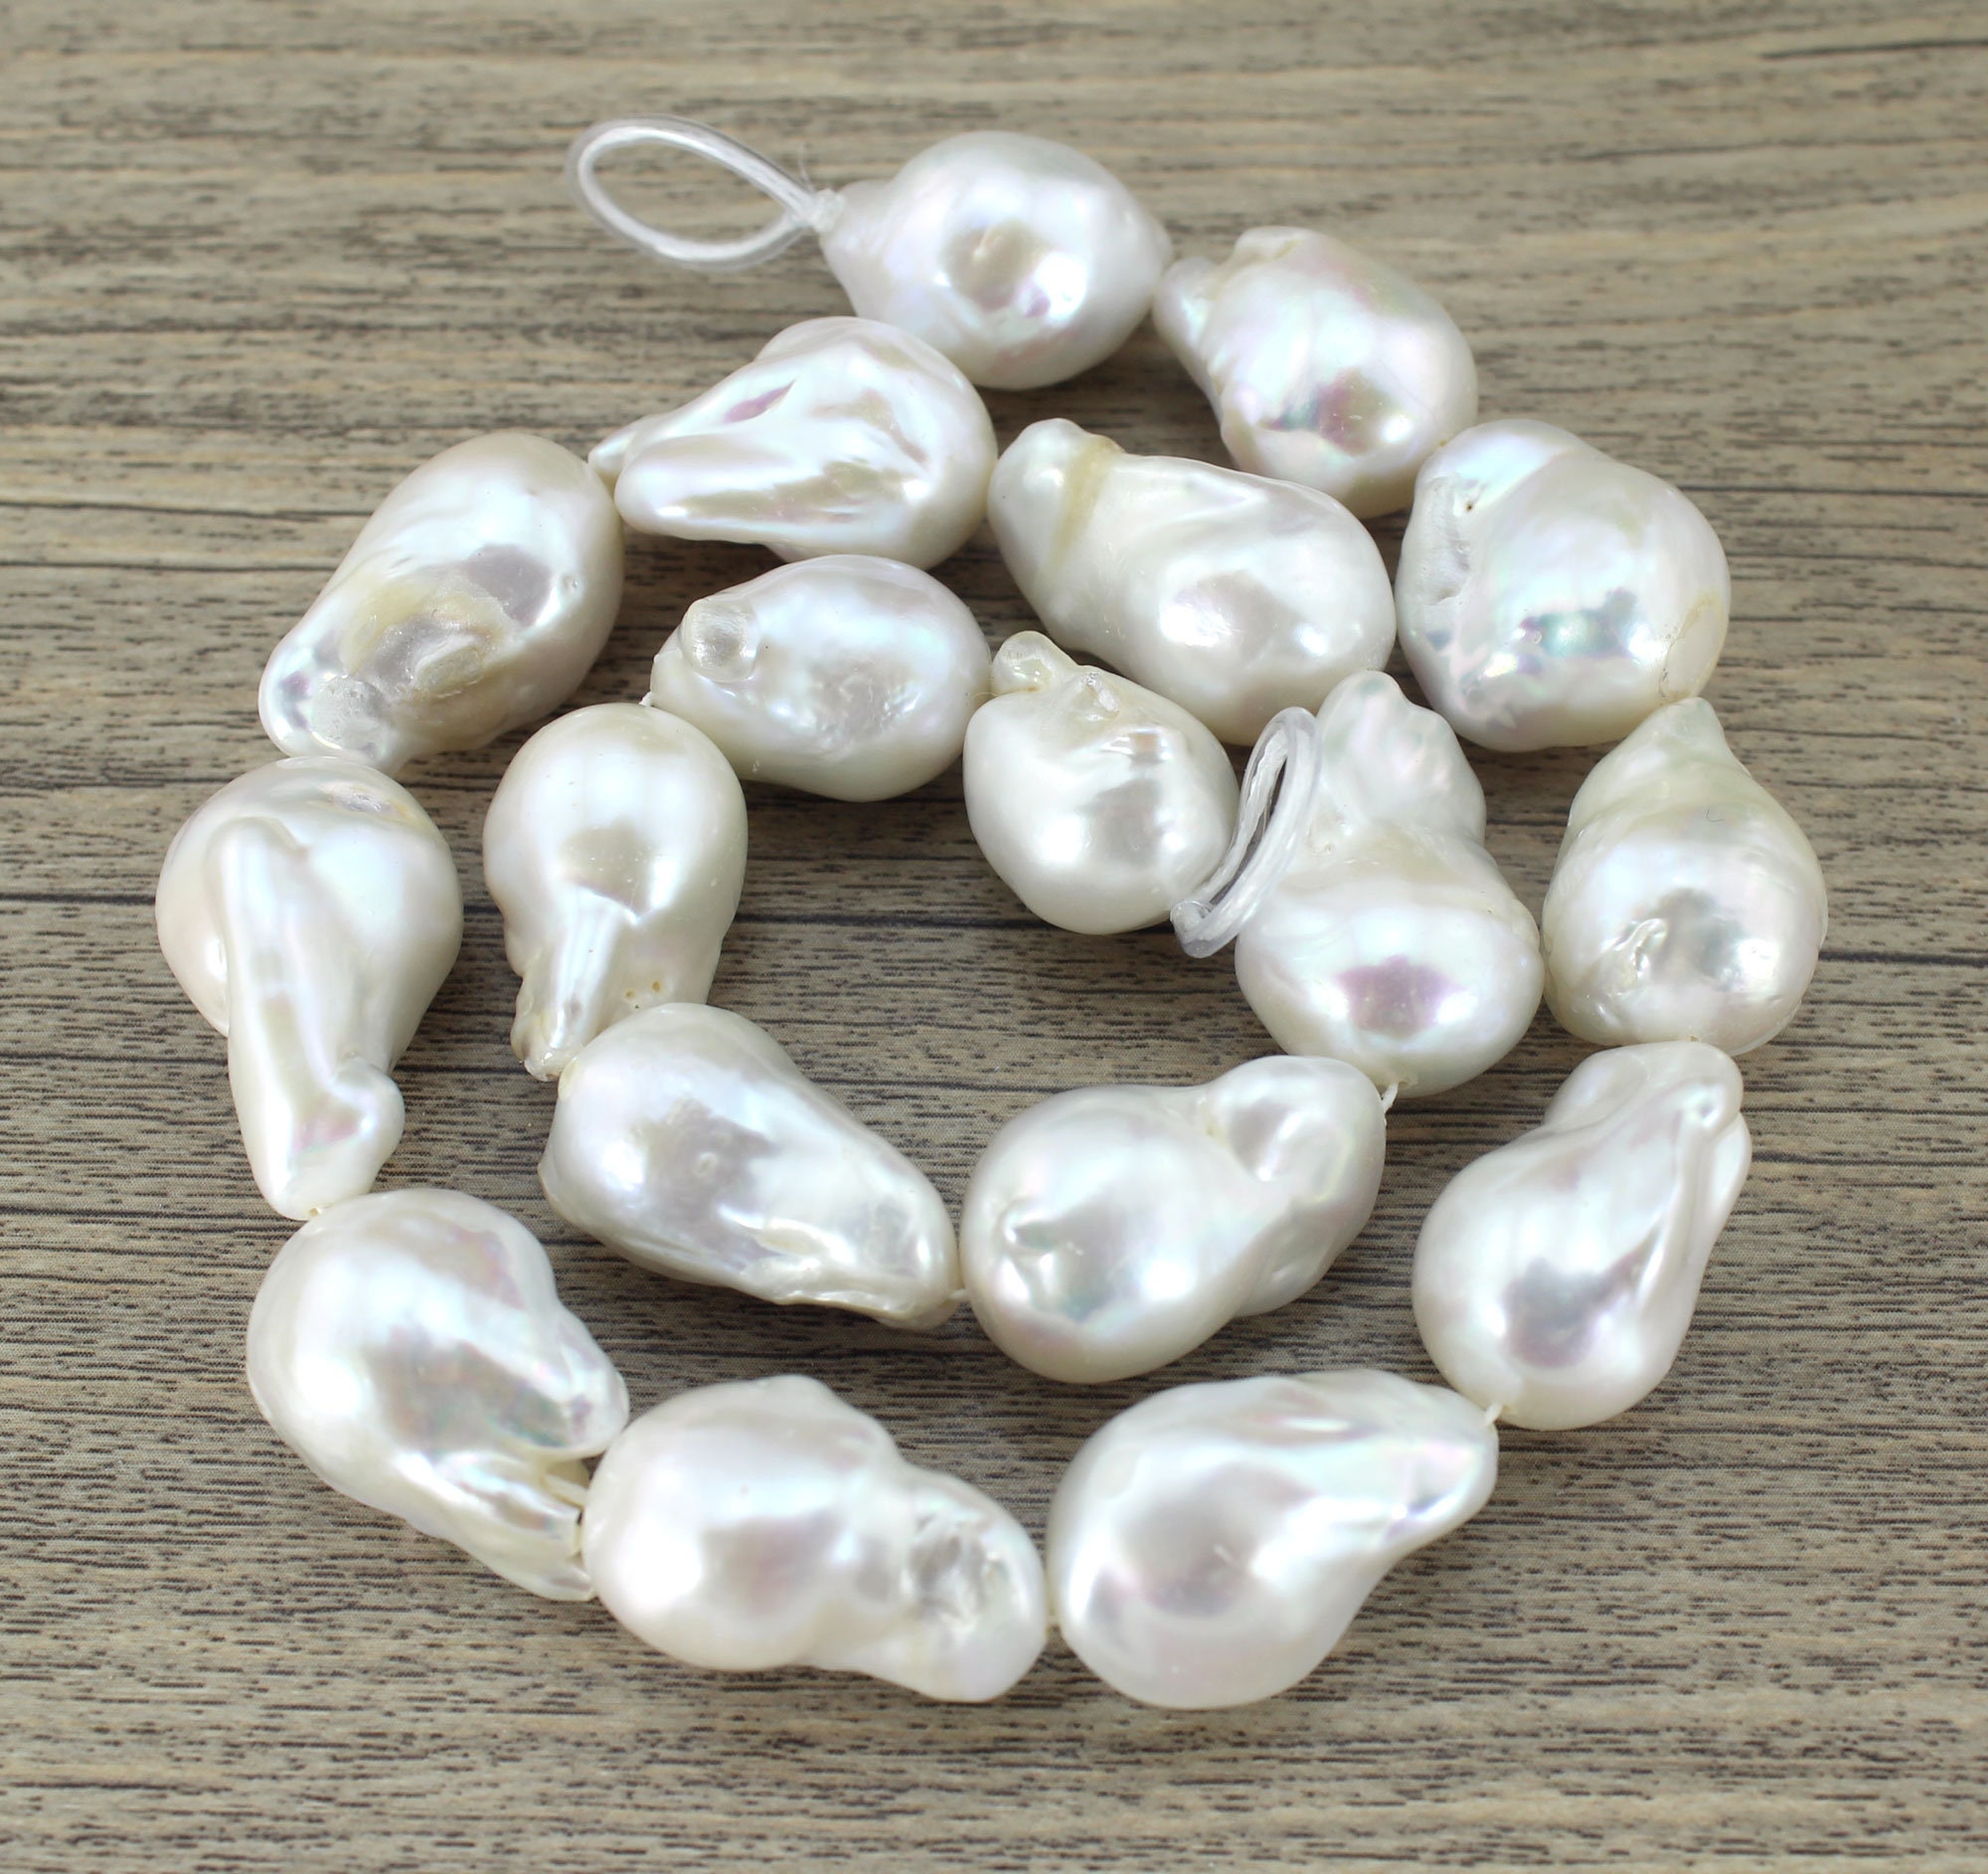 Full Pearl Stone, Real Pearl Stones, Water Pearls Uk, Follow Your Own Path,  Elfkendalhippies, Genuine Pearls, Ex Husband Curser, Deal With X 